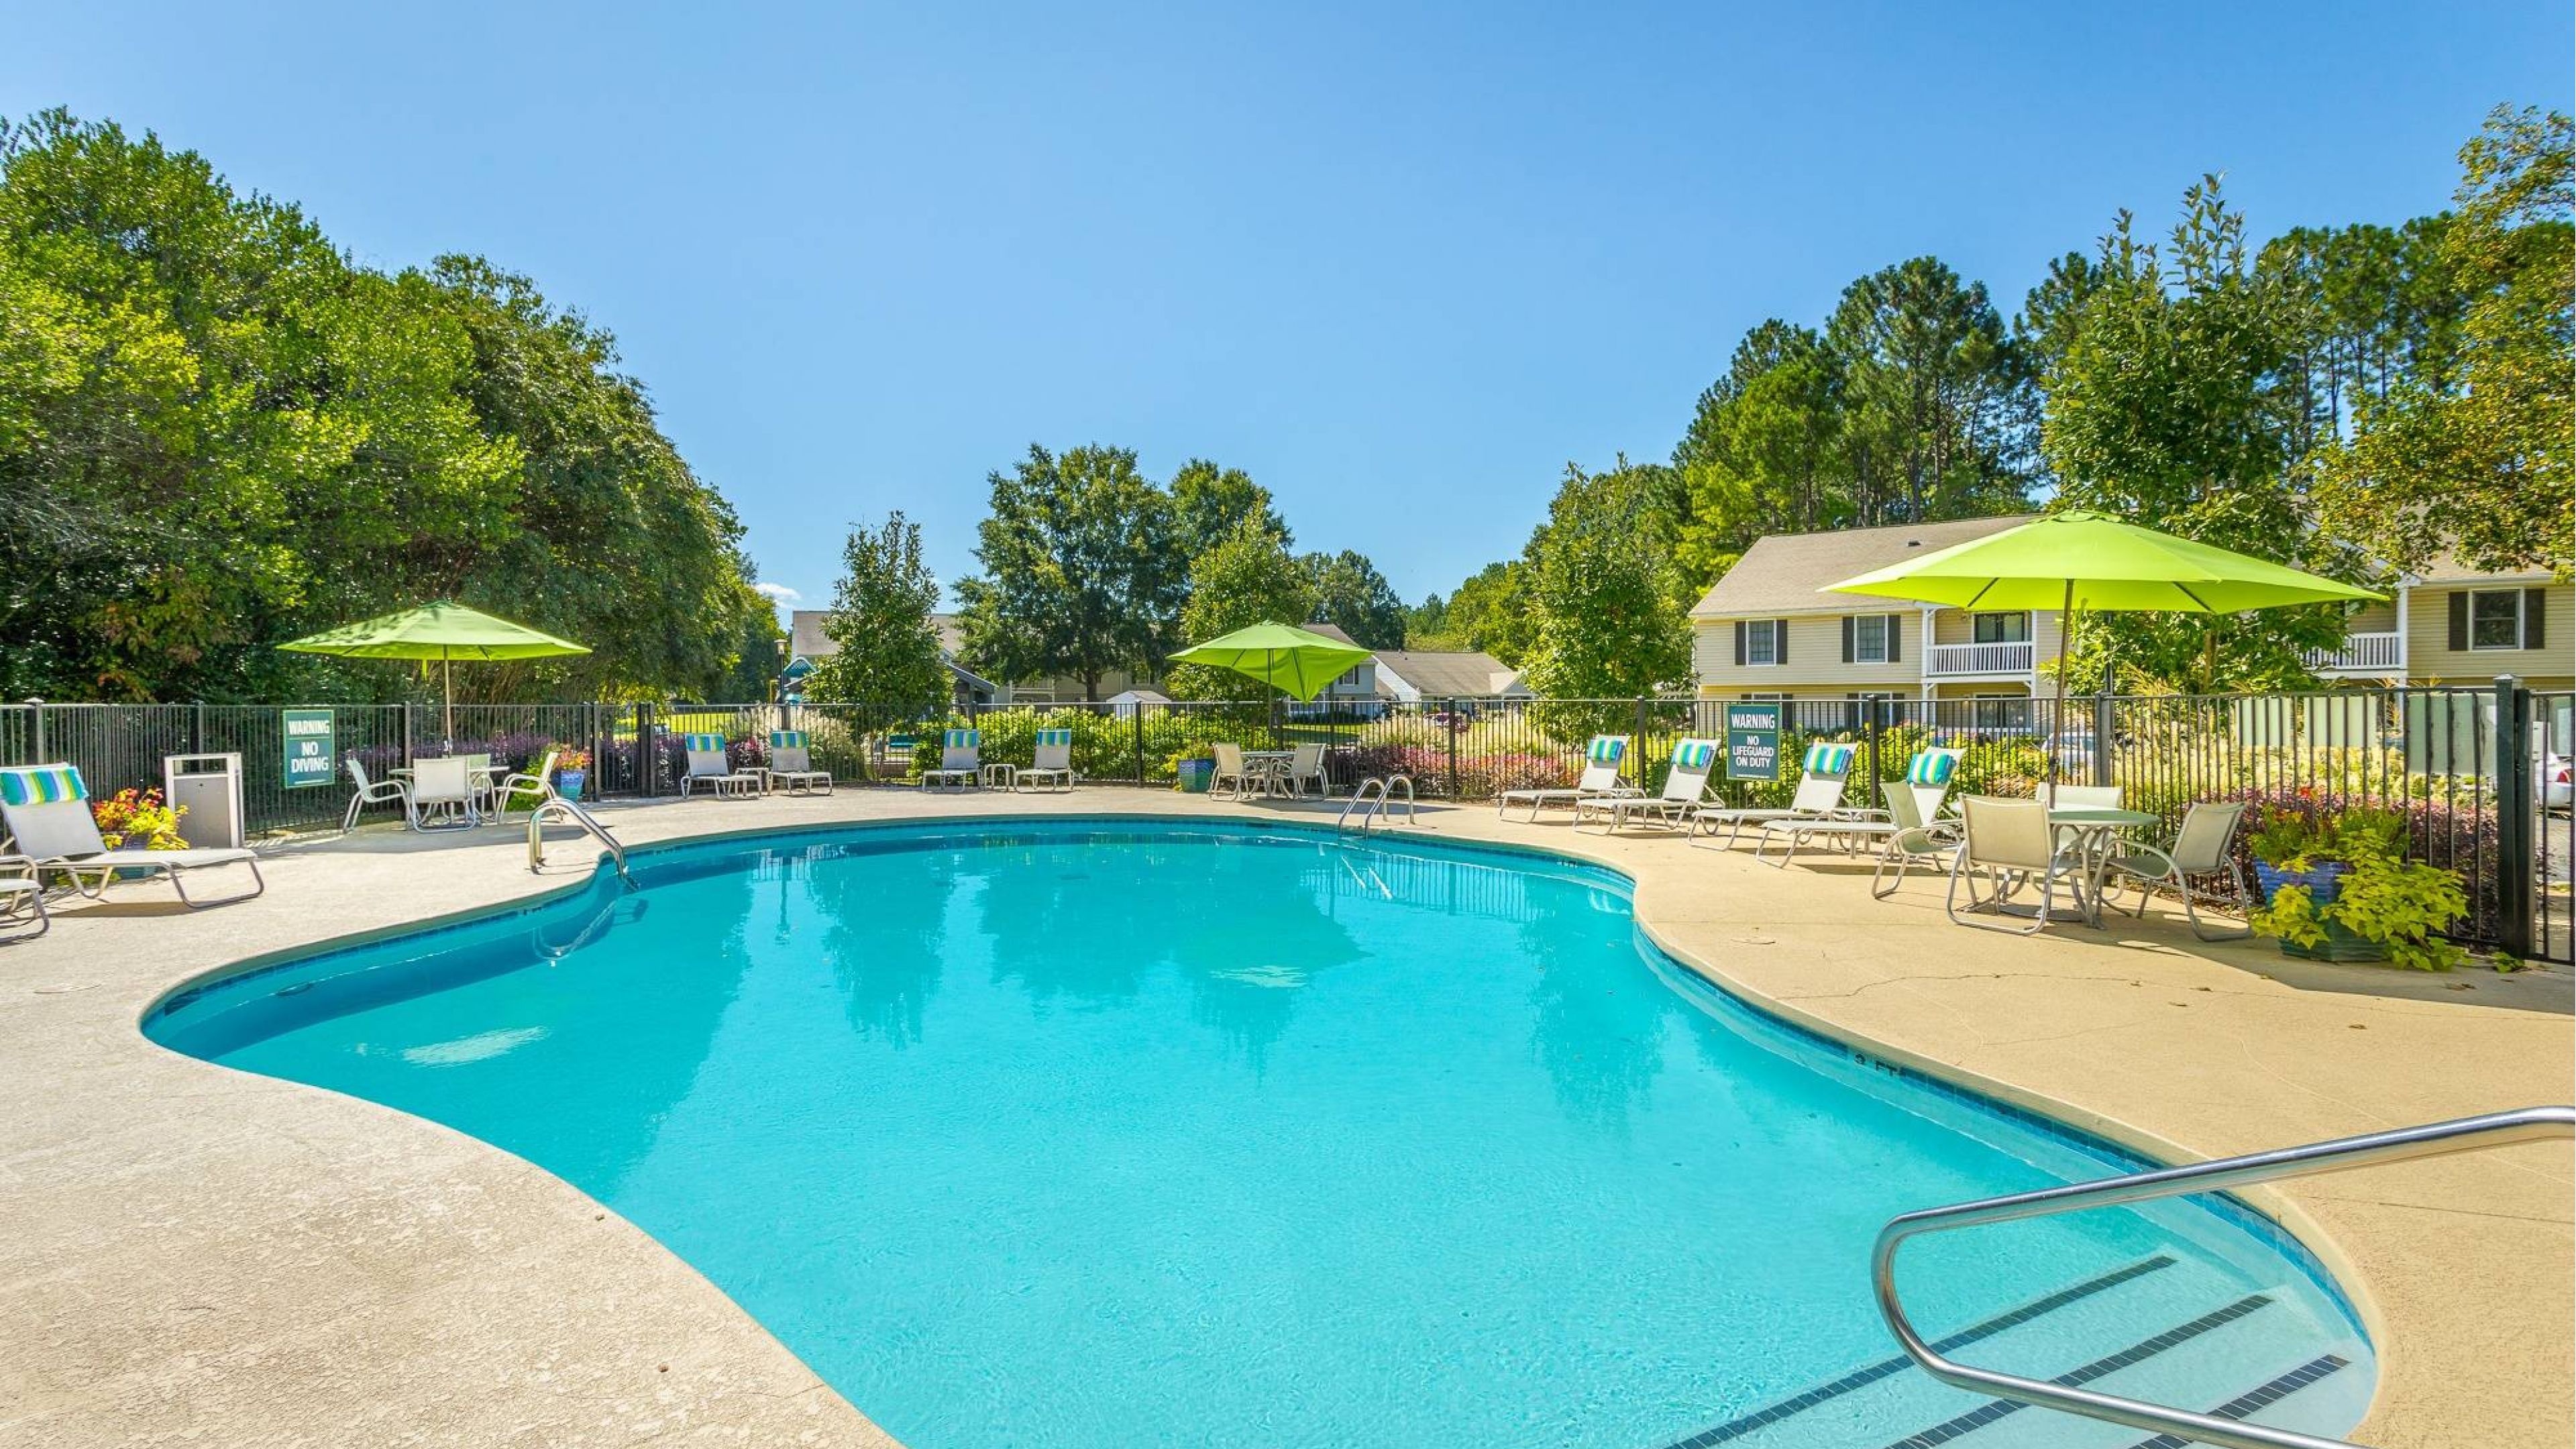 Hawthorne at Lily Flagg luxury outdoor pool with lounge chairs, umbrellas, and surrounding seating